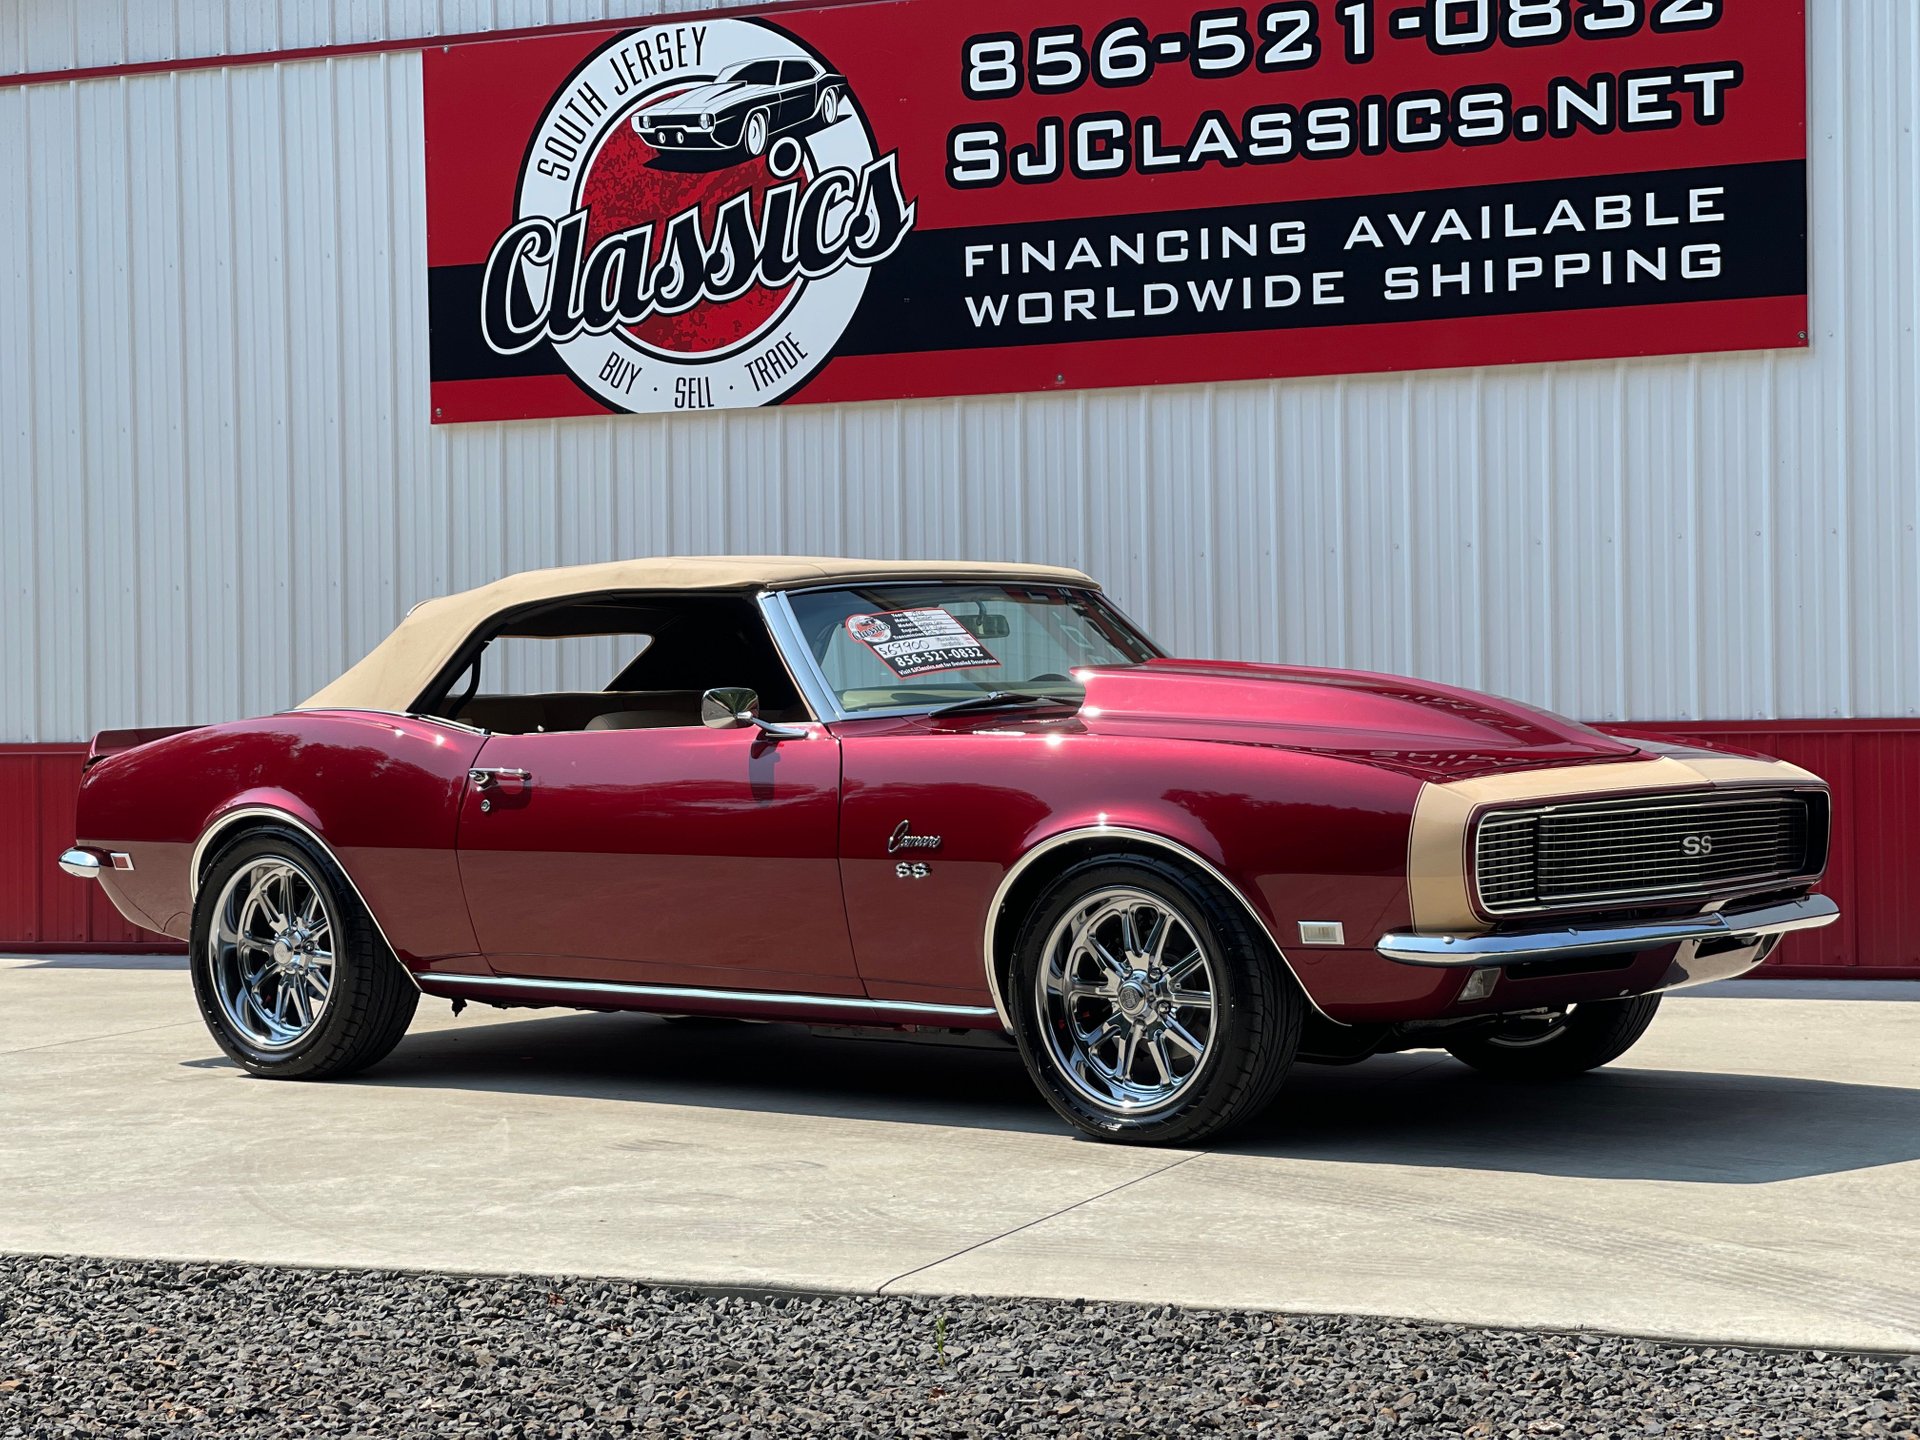 Real-deal restored 1968 Chevrolet Camaro Z28 coupe